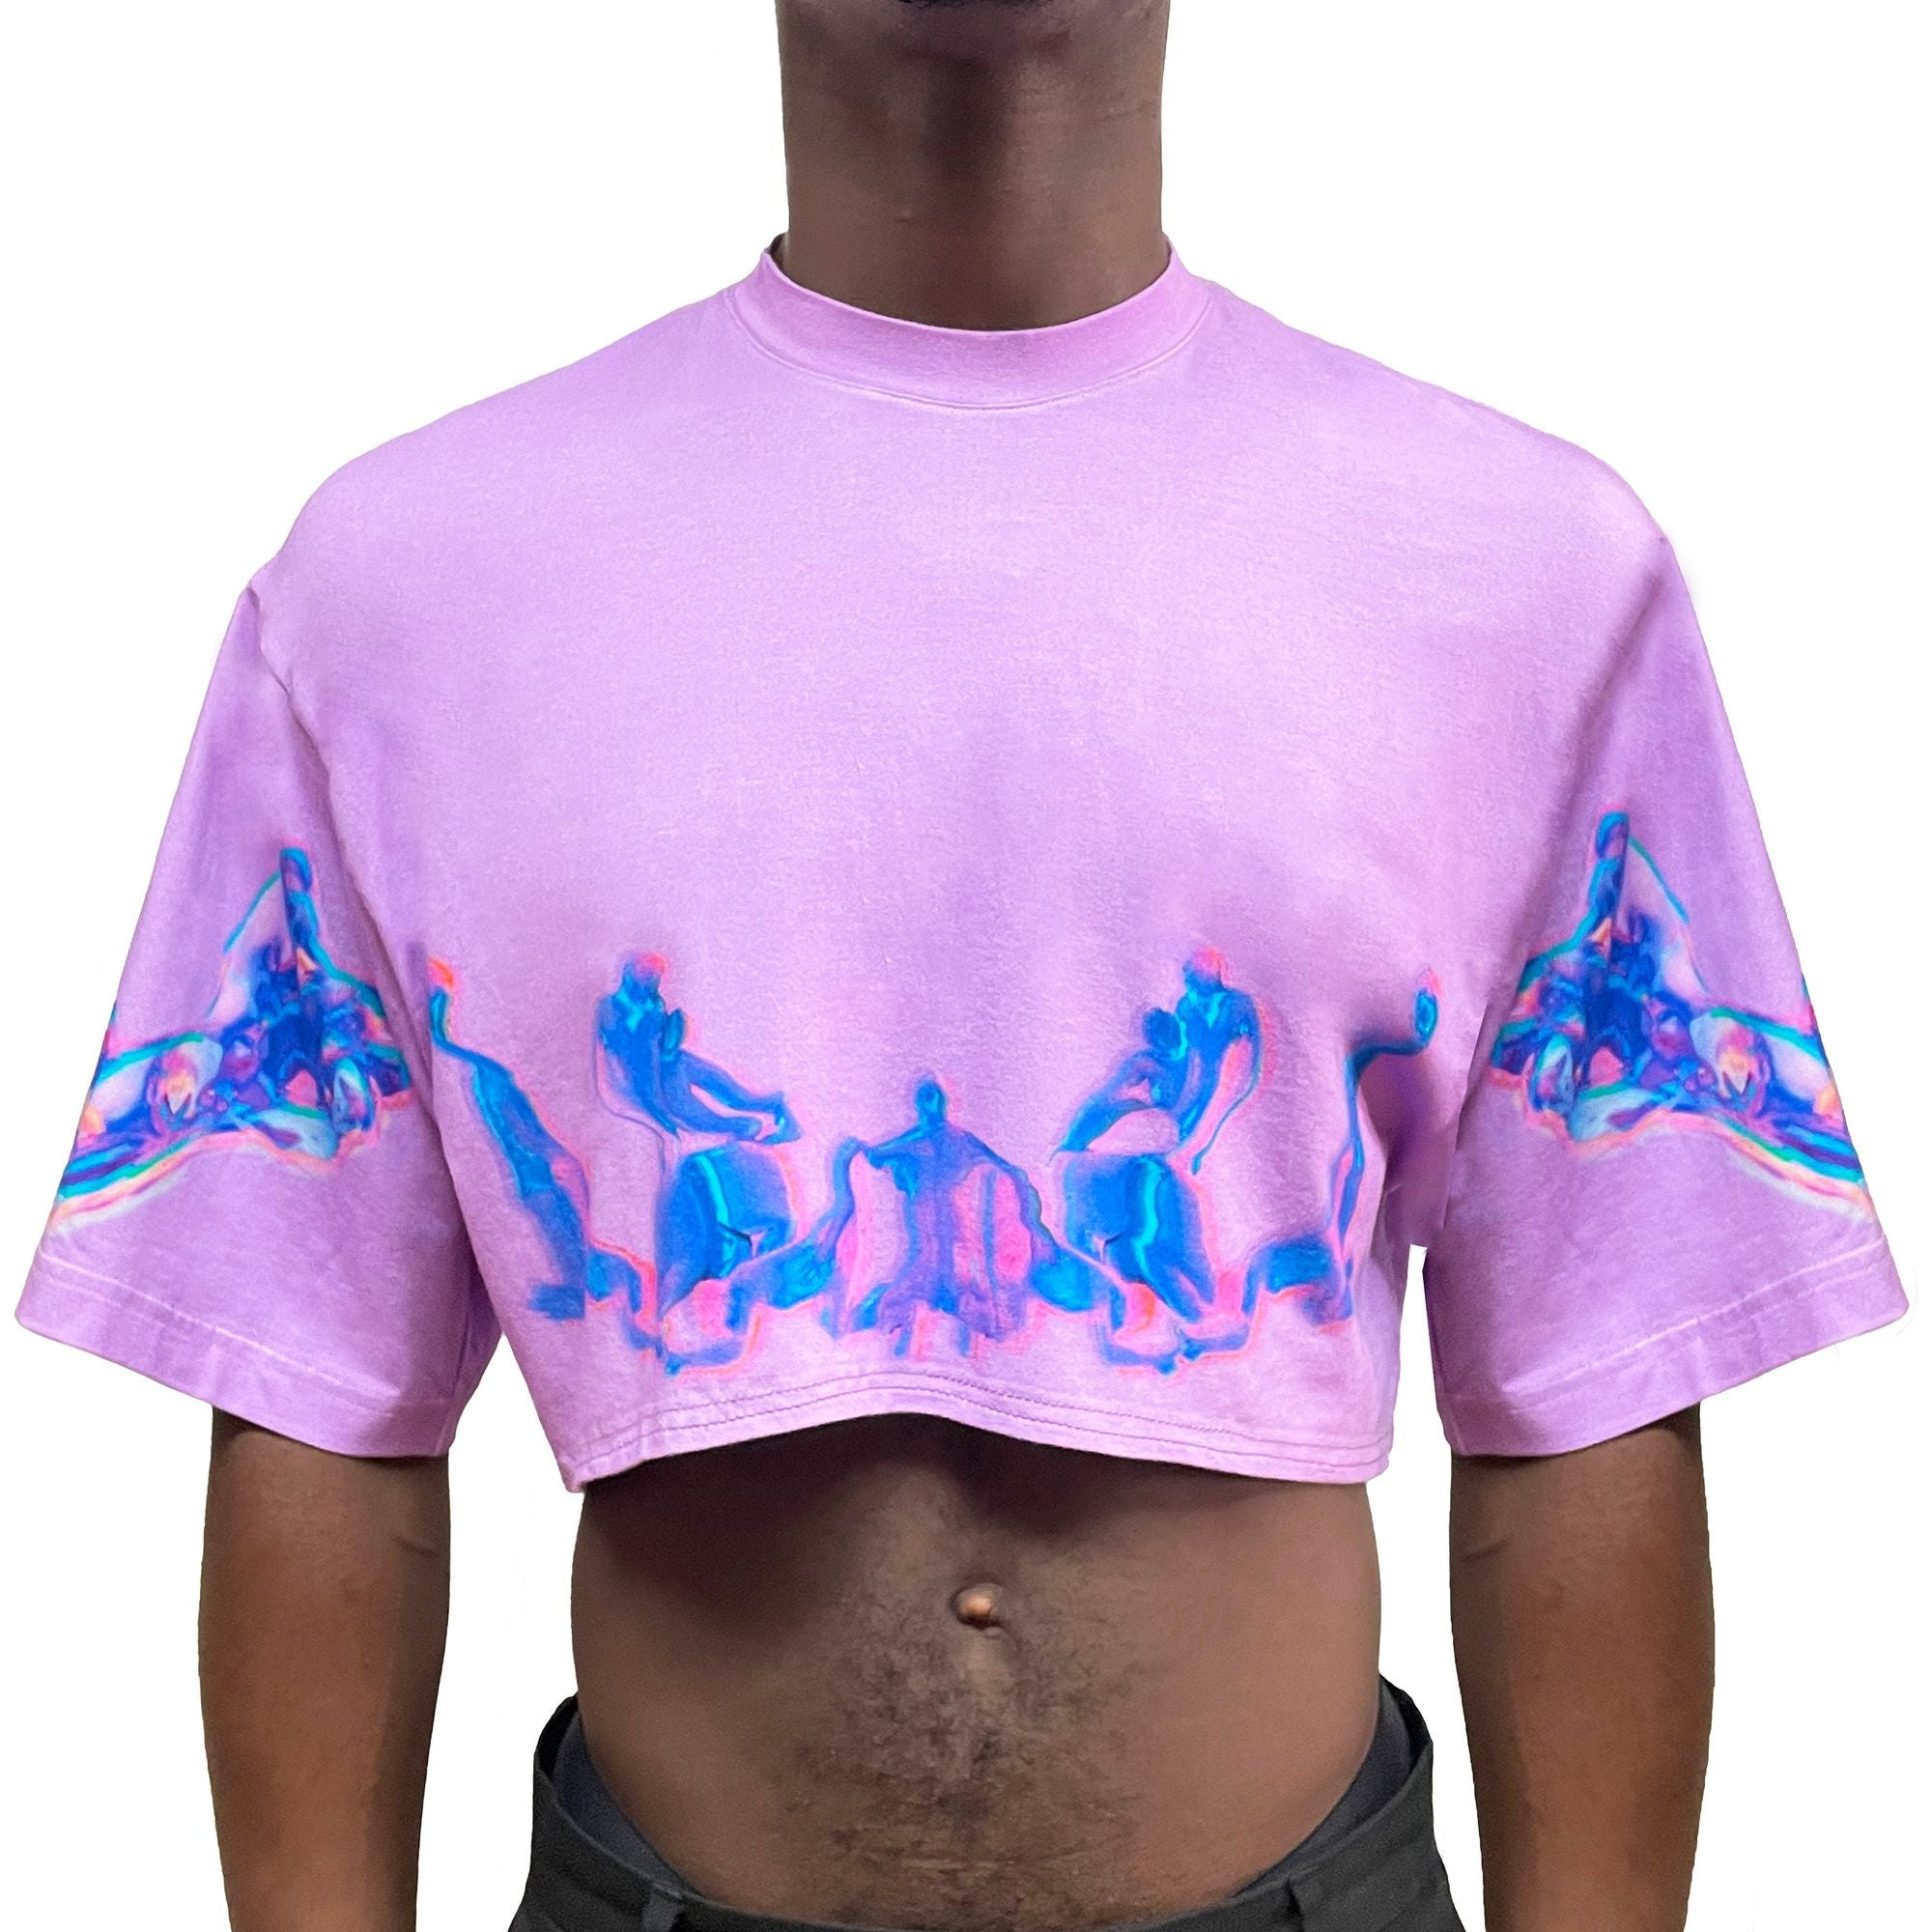 "Daisy Chain" Oversized Cropped T-Shirt (Lavender)